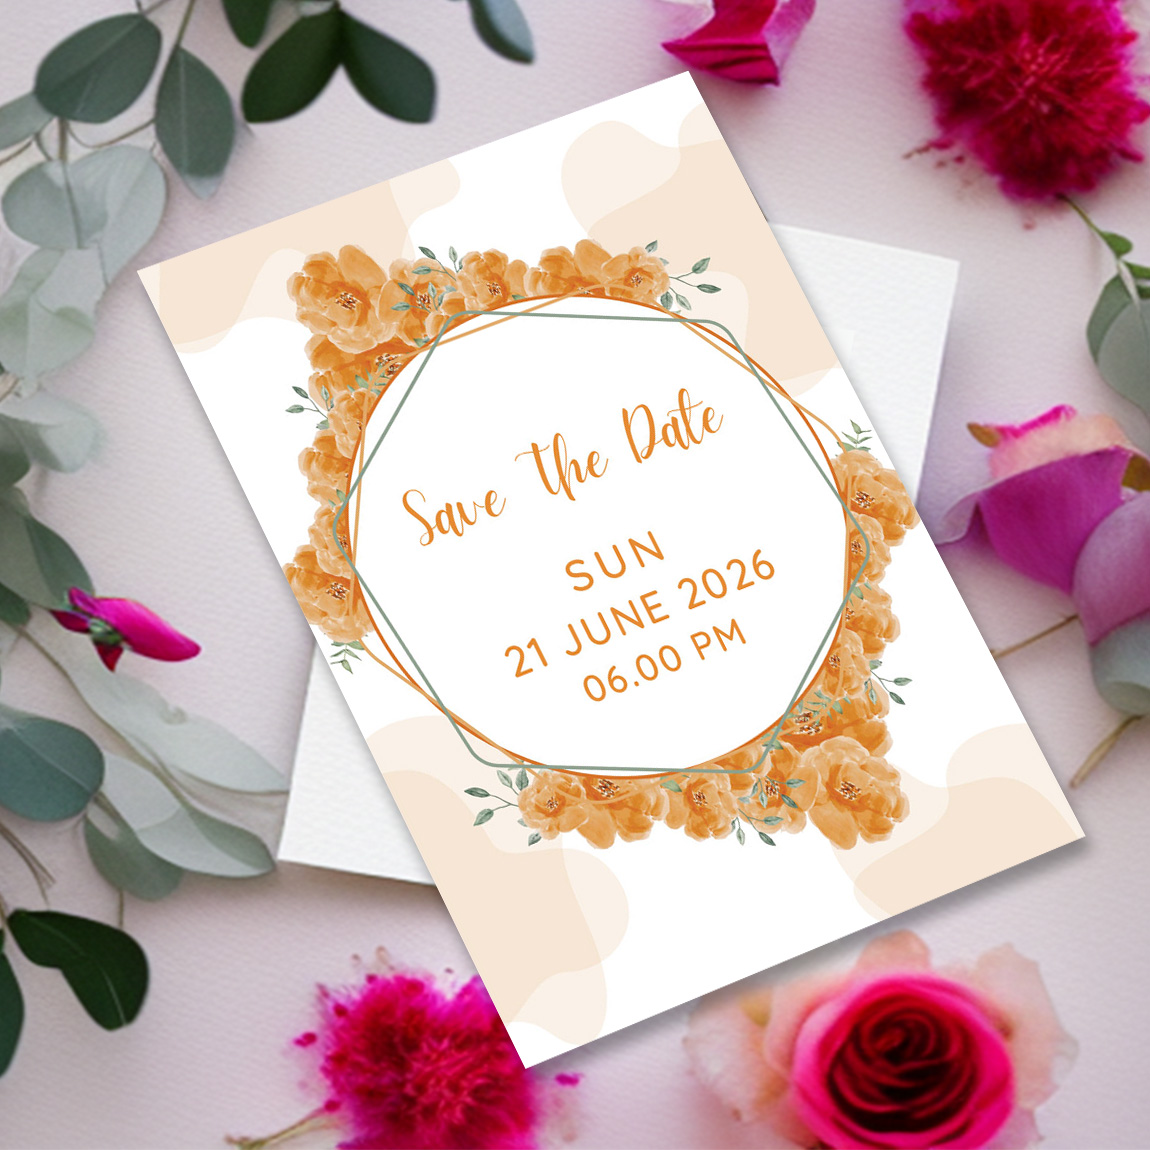 Image with colorful wedding invitation with roses floral frame.